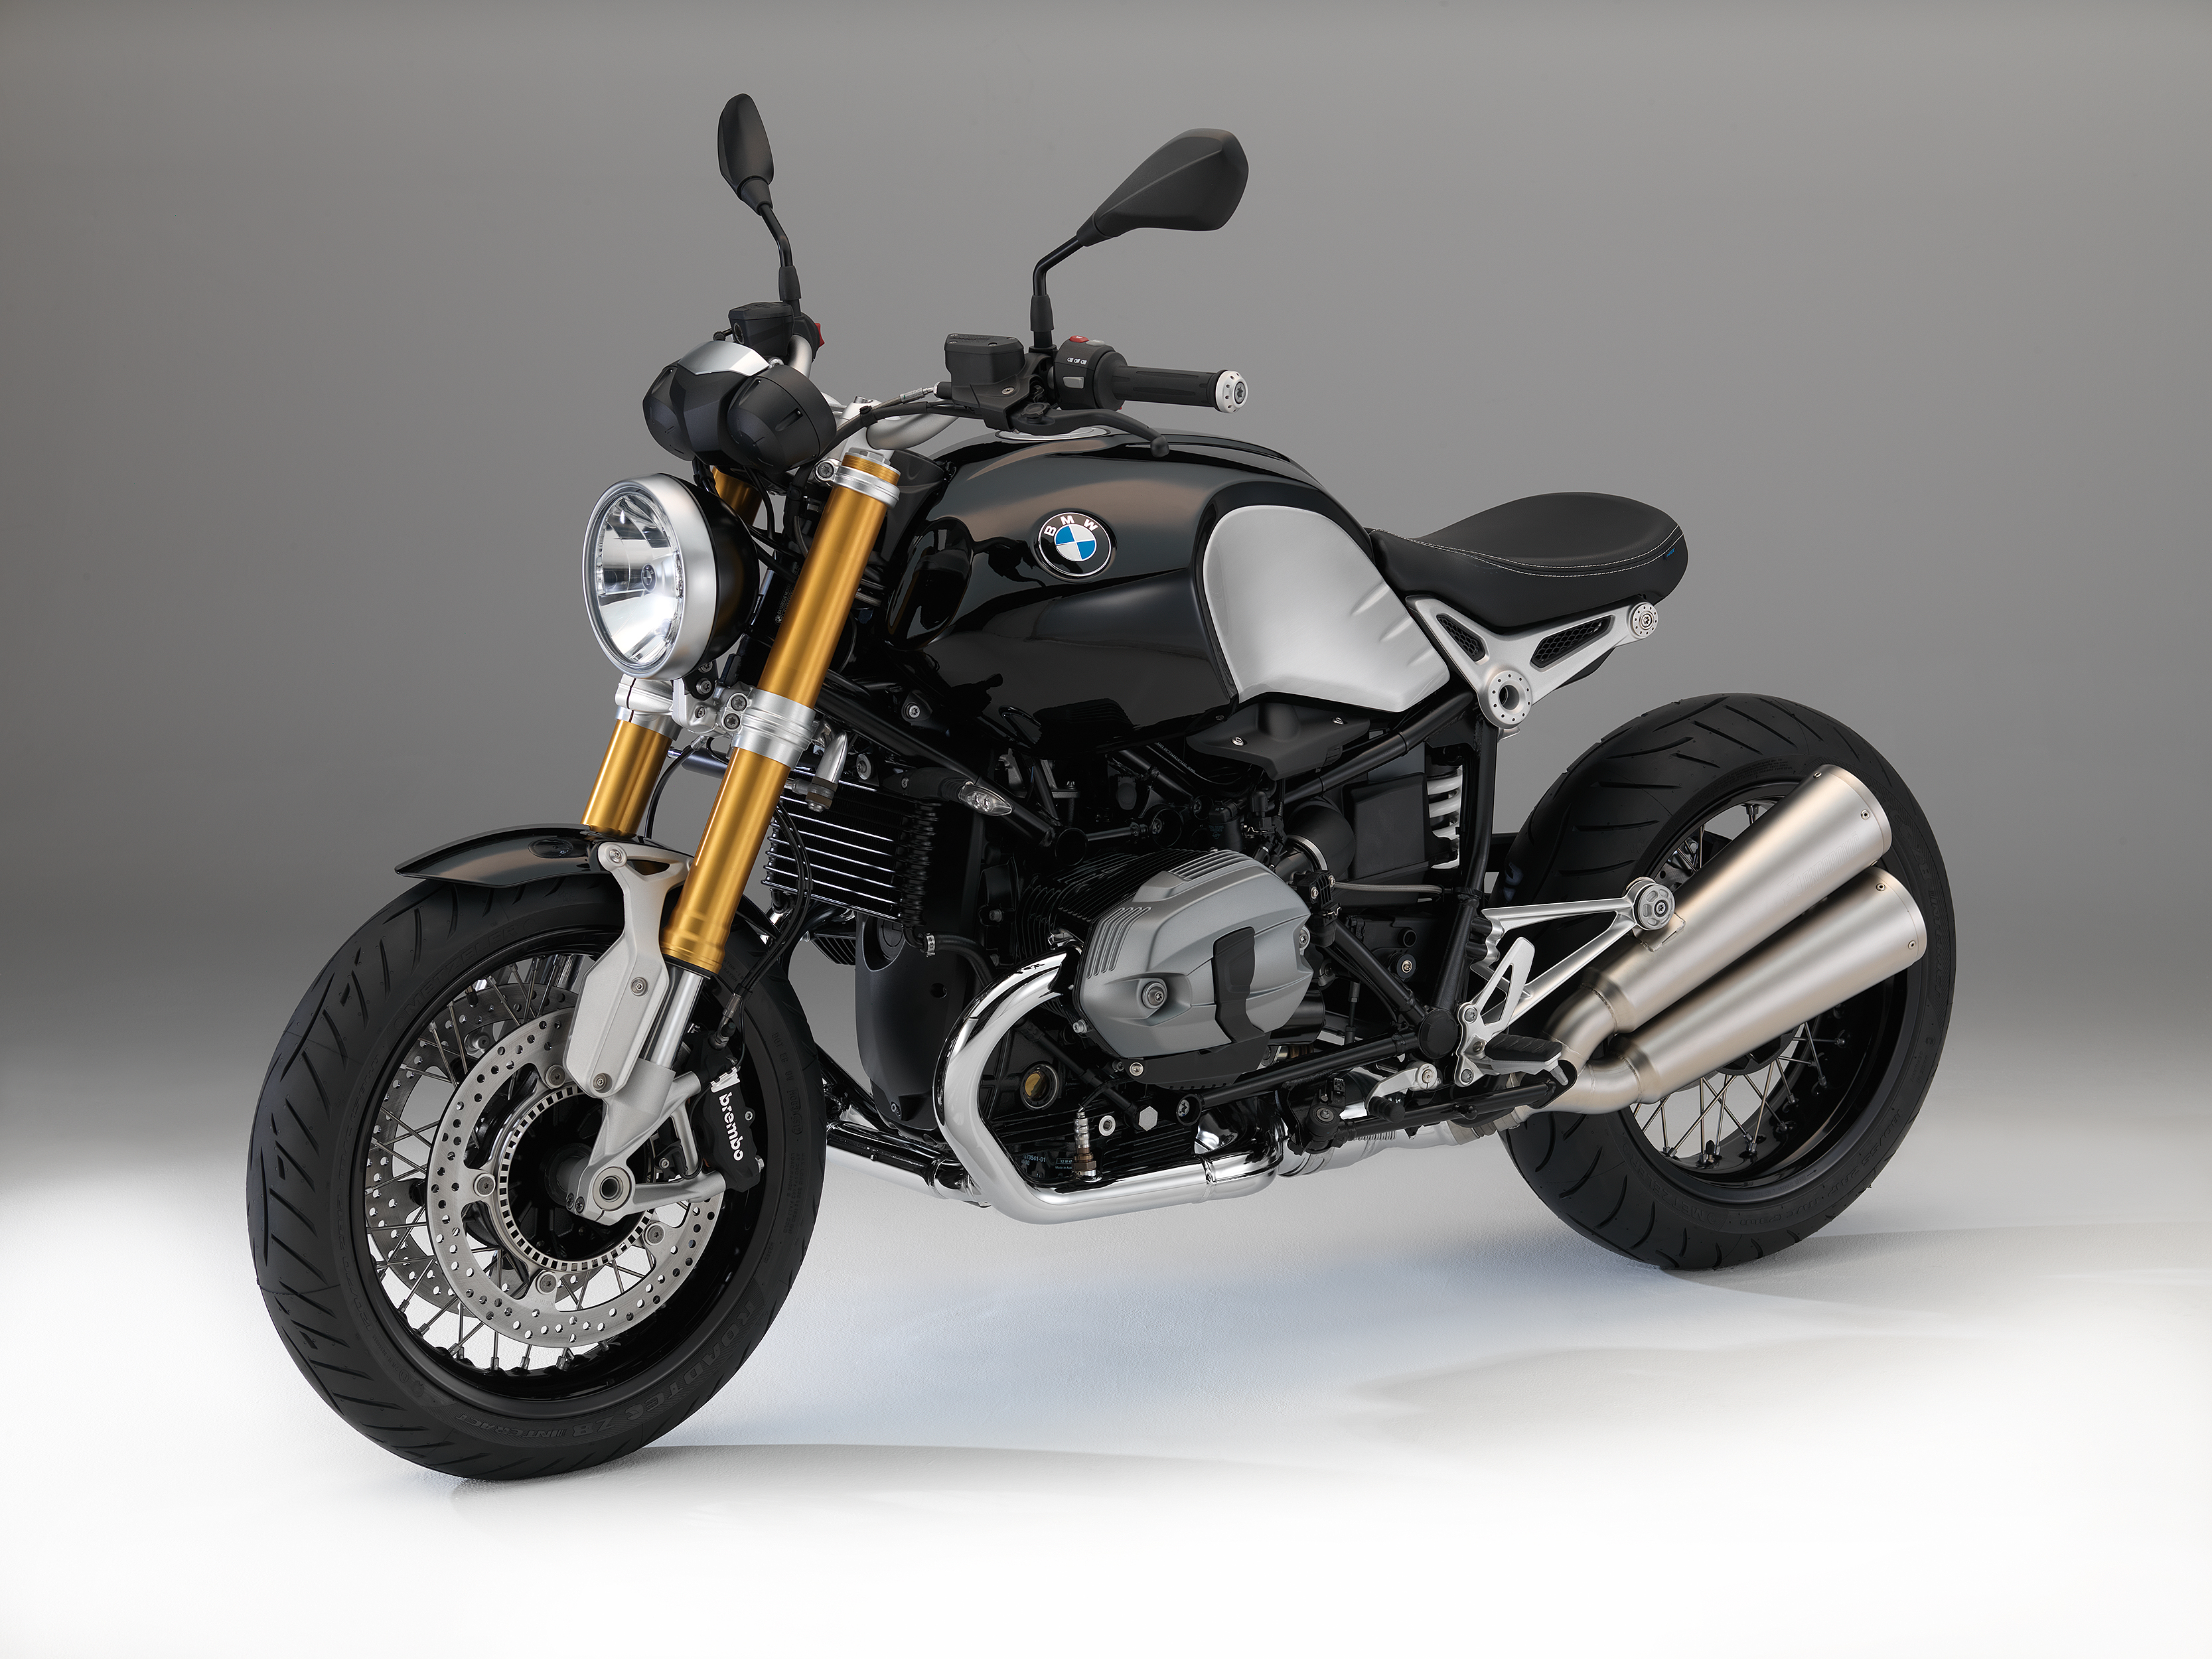 BMW NineT specs and pictures